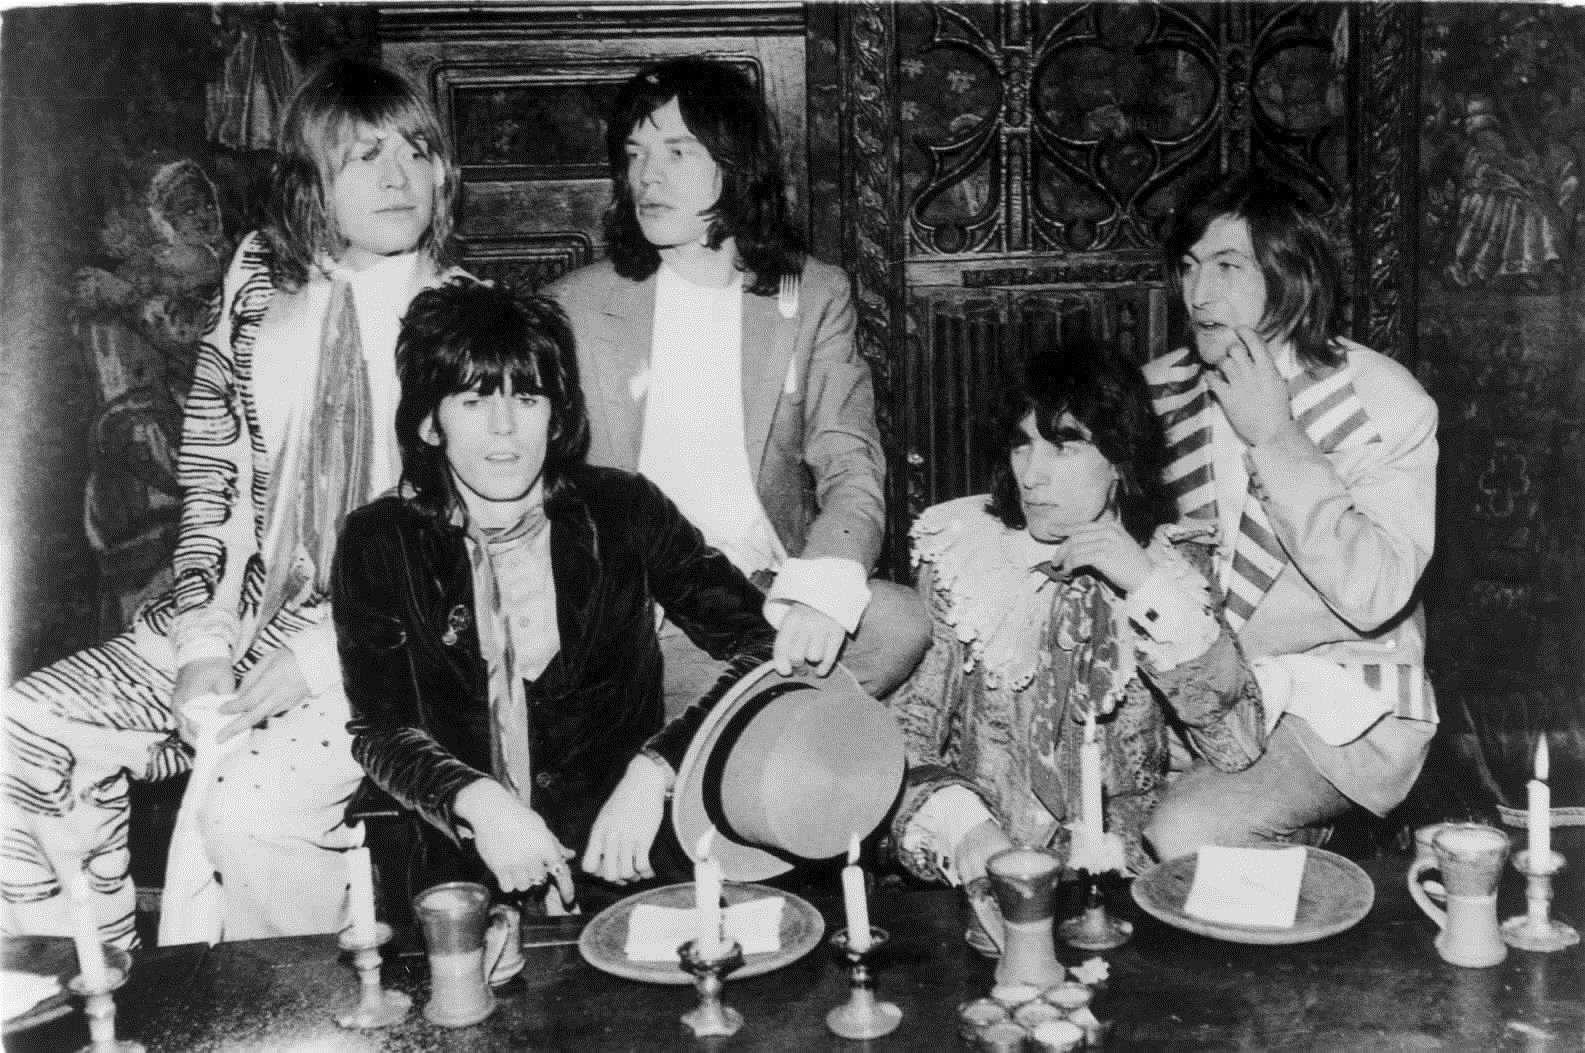 The Rolling Stones, (left to right) Brian Jones, Keith Richards, Mick Jagger, Bill Wyman and Charlie Watts